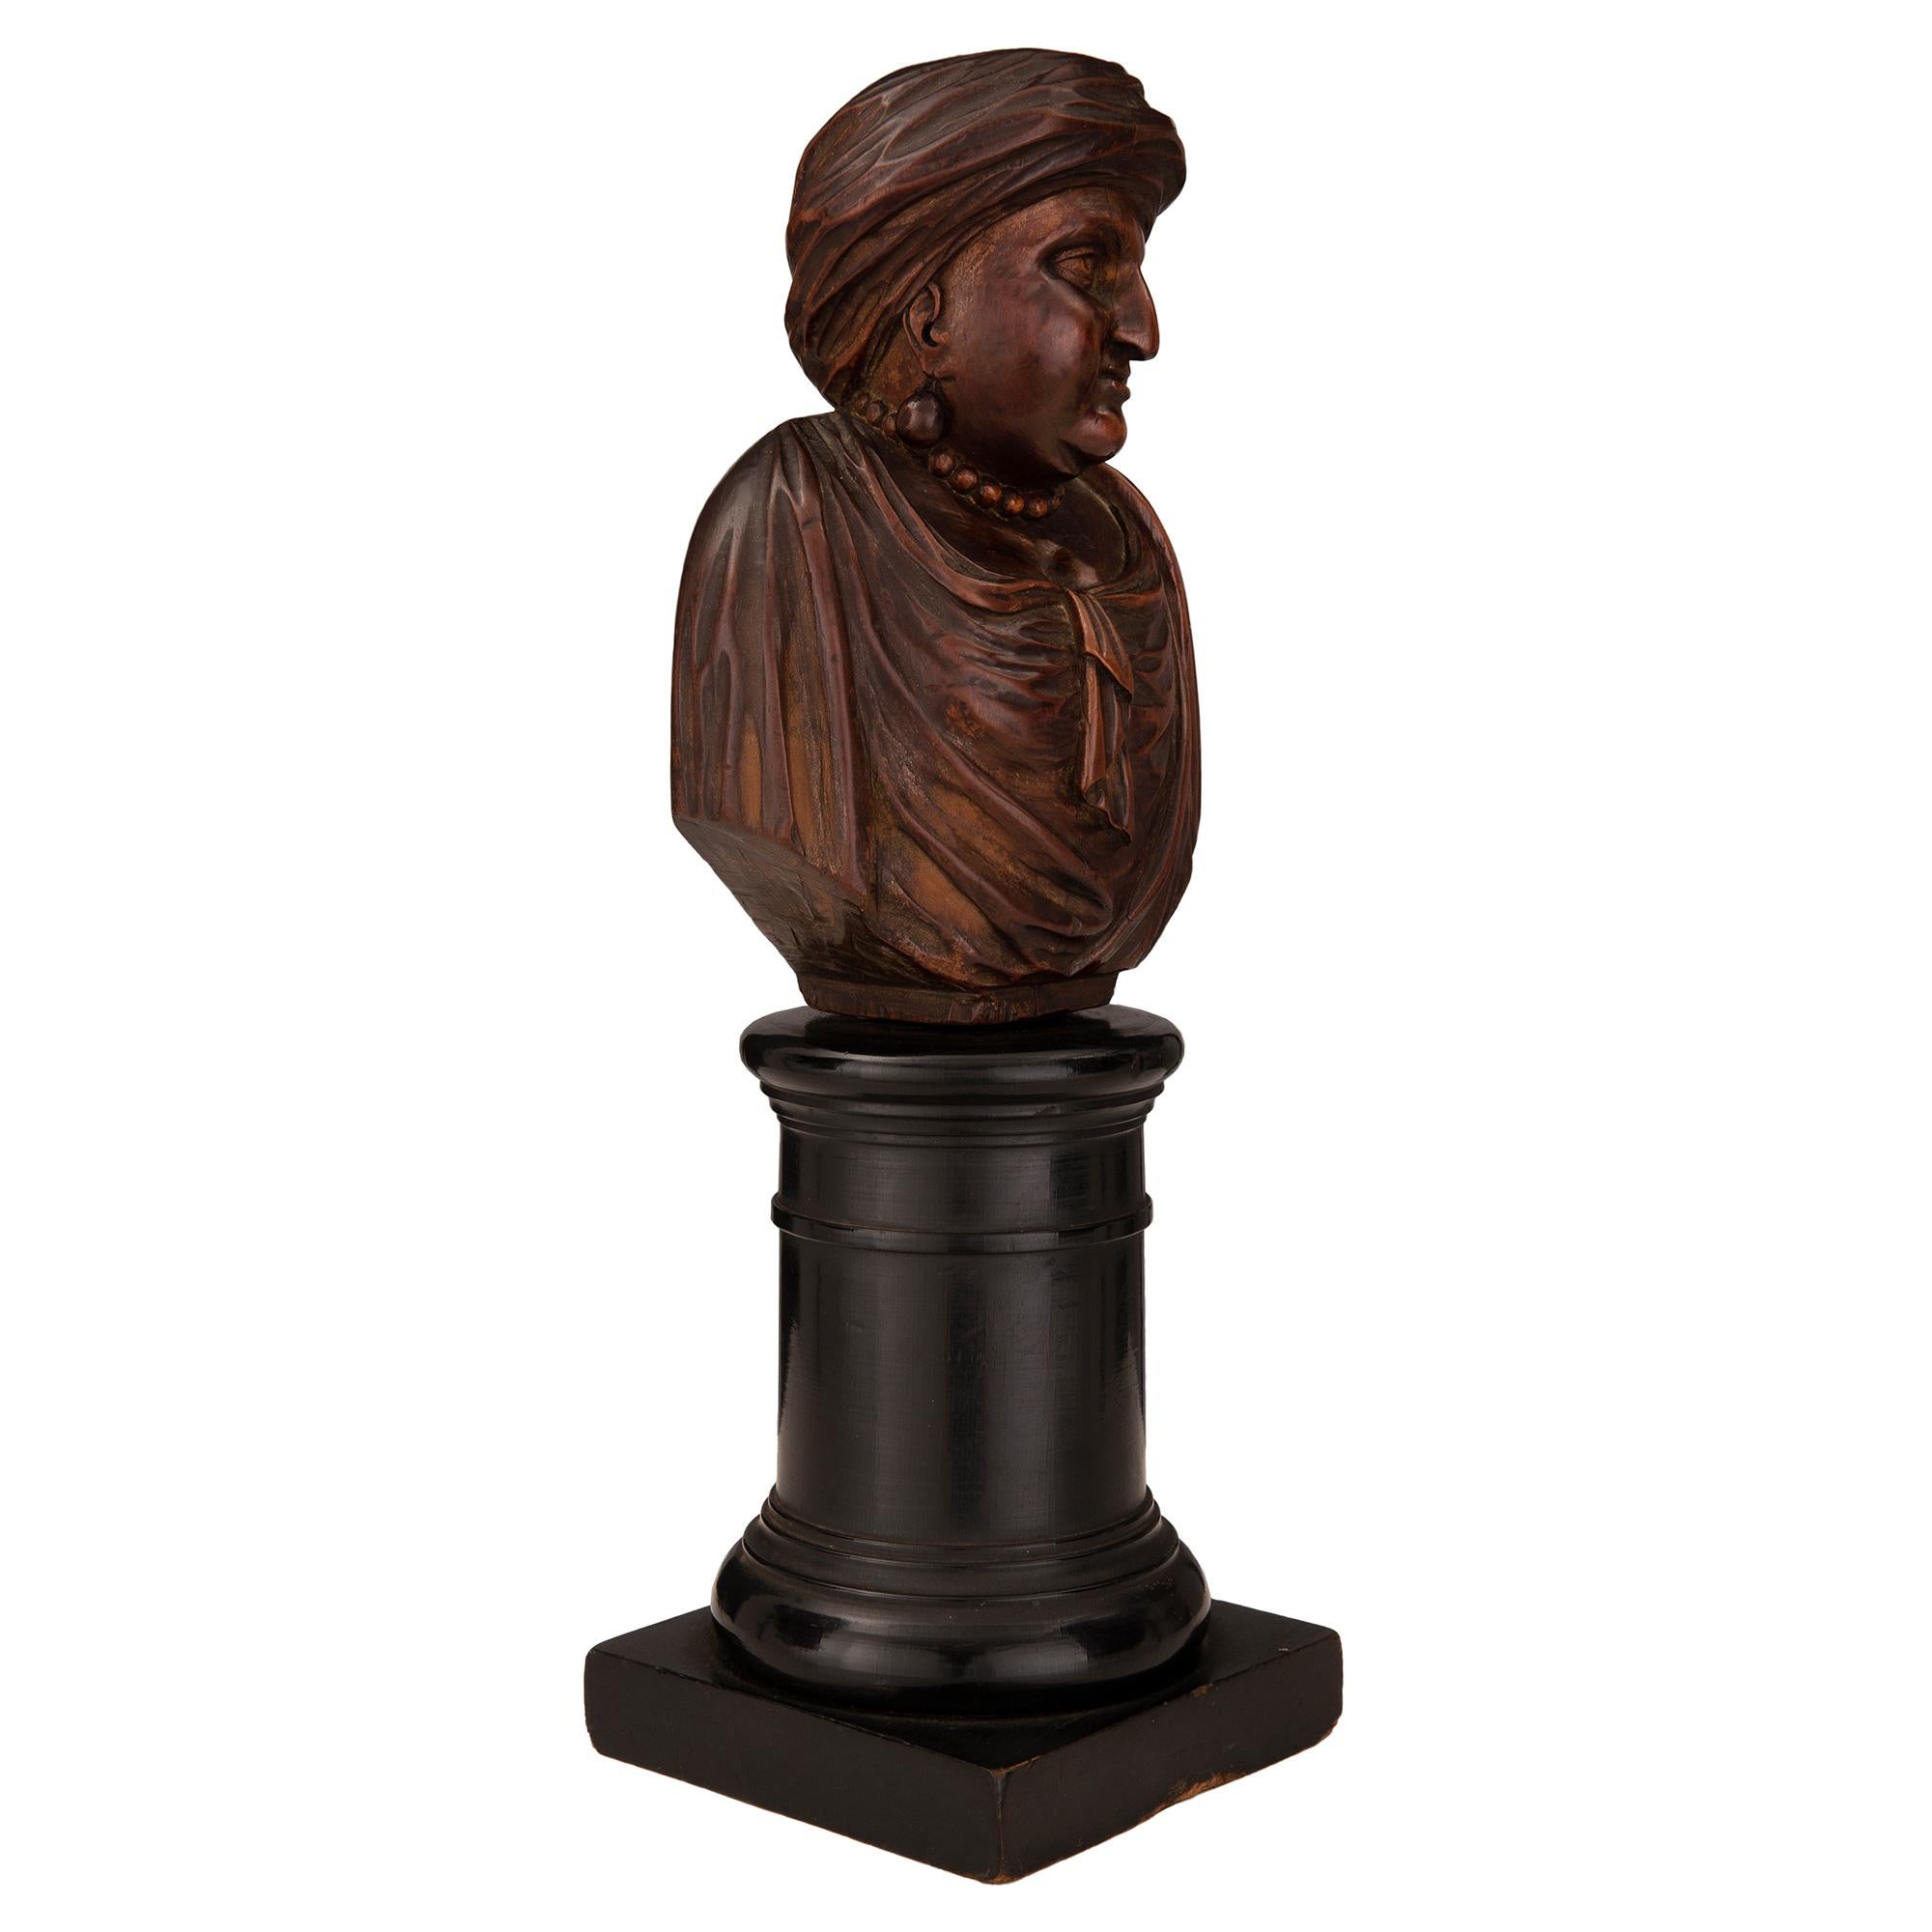 A charming and finely detailed pair of early 19th century carved walnut and ebonized fruitwood busts of Turkish nobles. Each bust is raised by a square ebonized fruitwood base with an elegant circular mottled central support. The richly carved